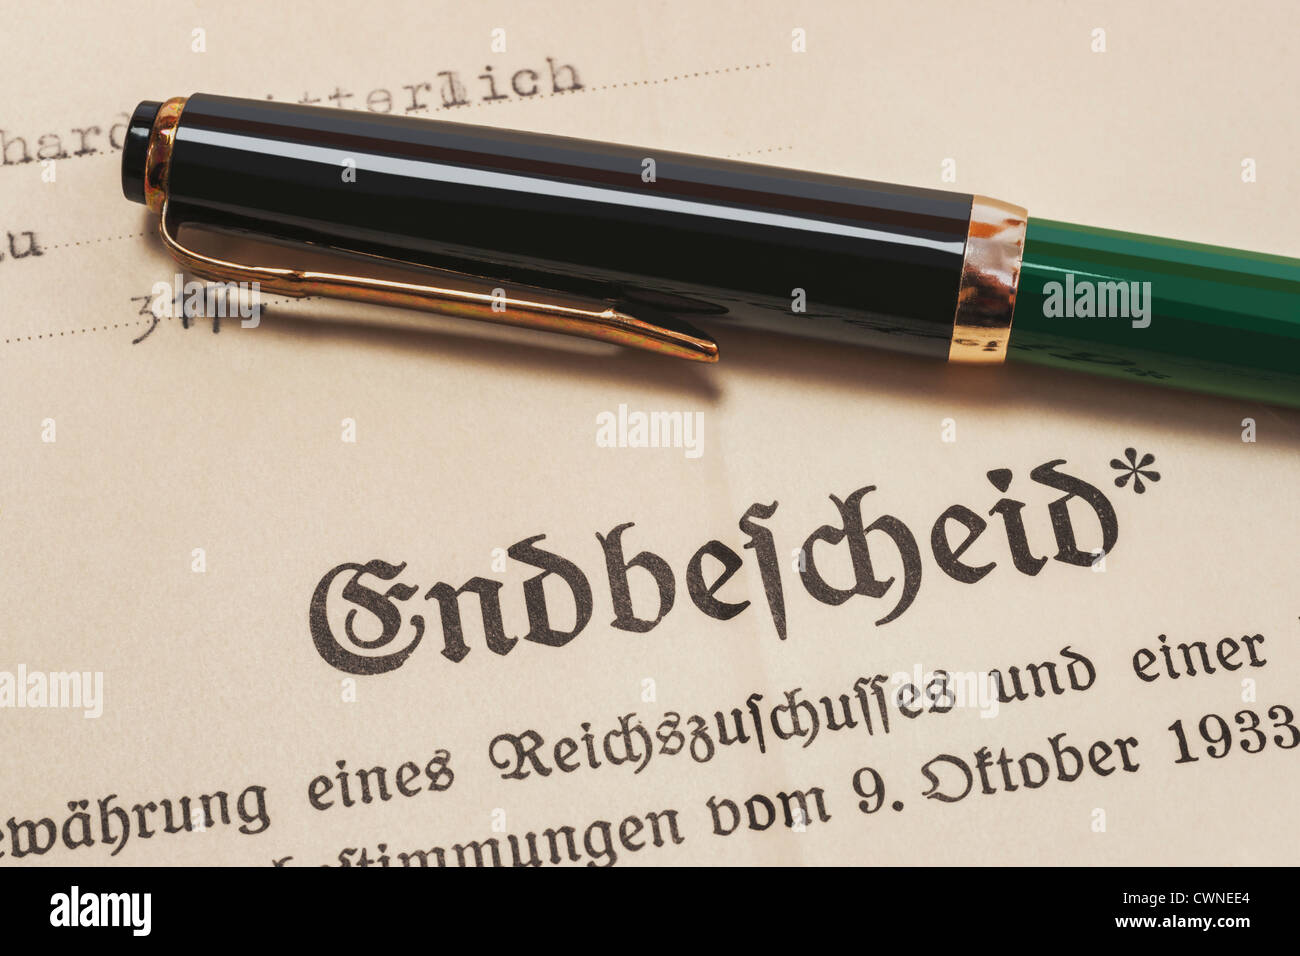 old German definite decision from the year 1933, a fountain pen is alongside Stock Photo